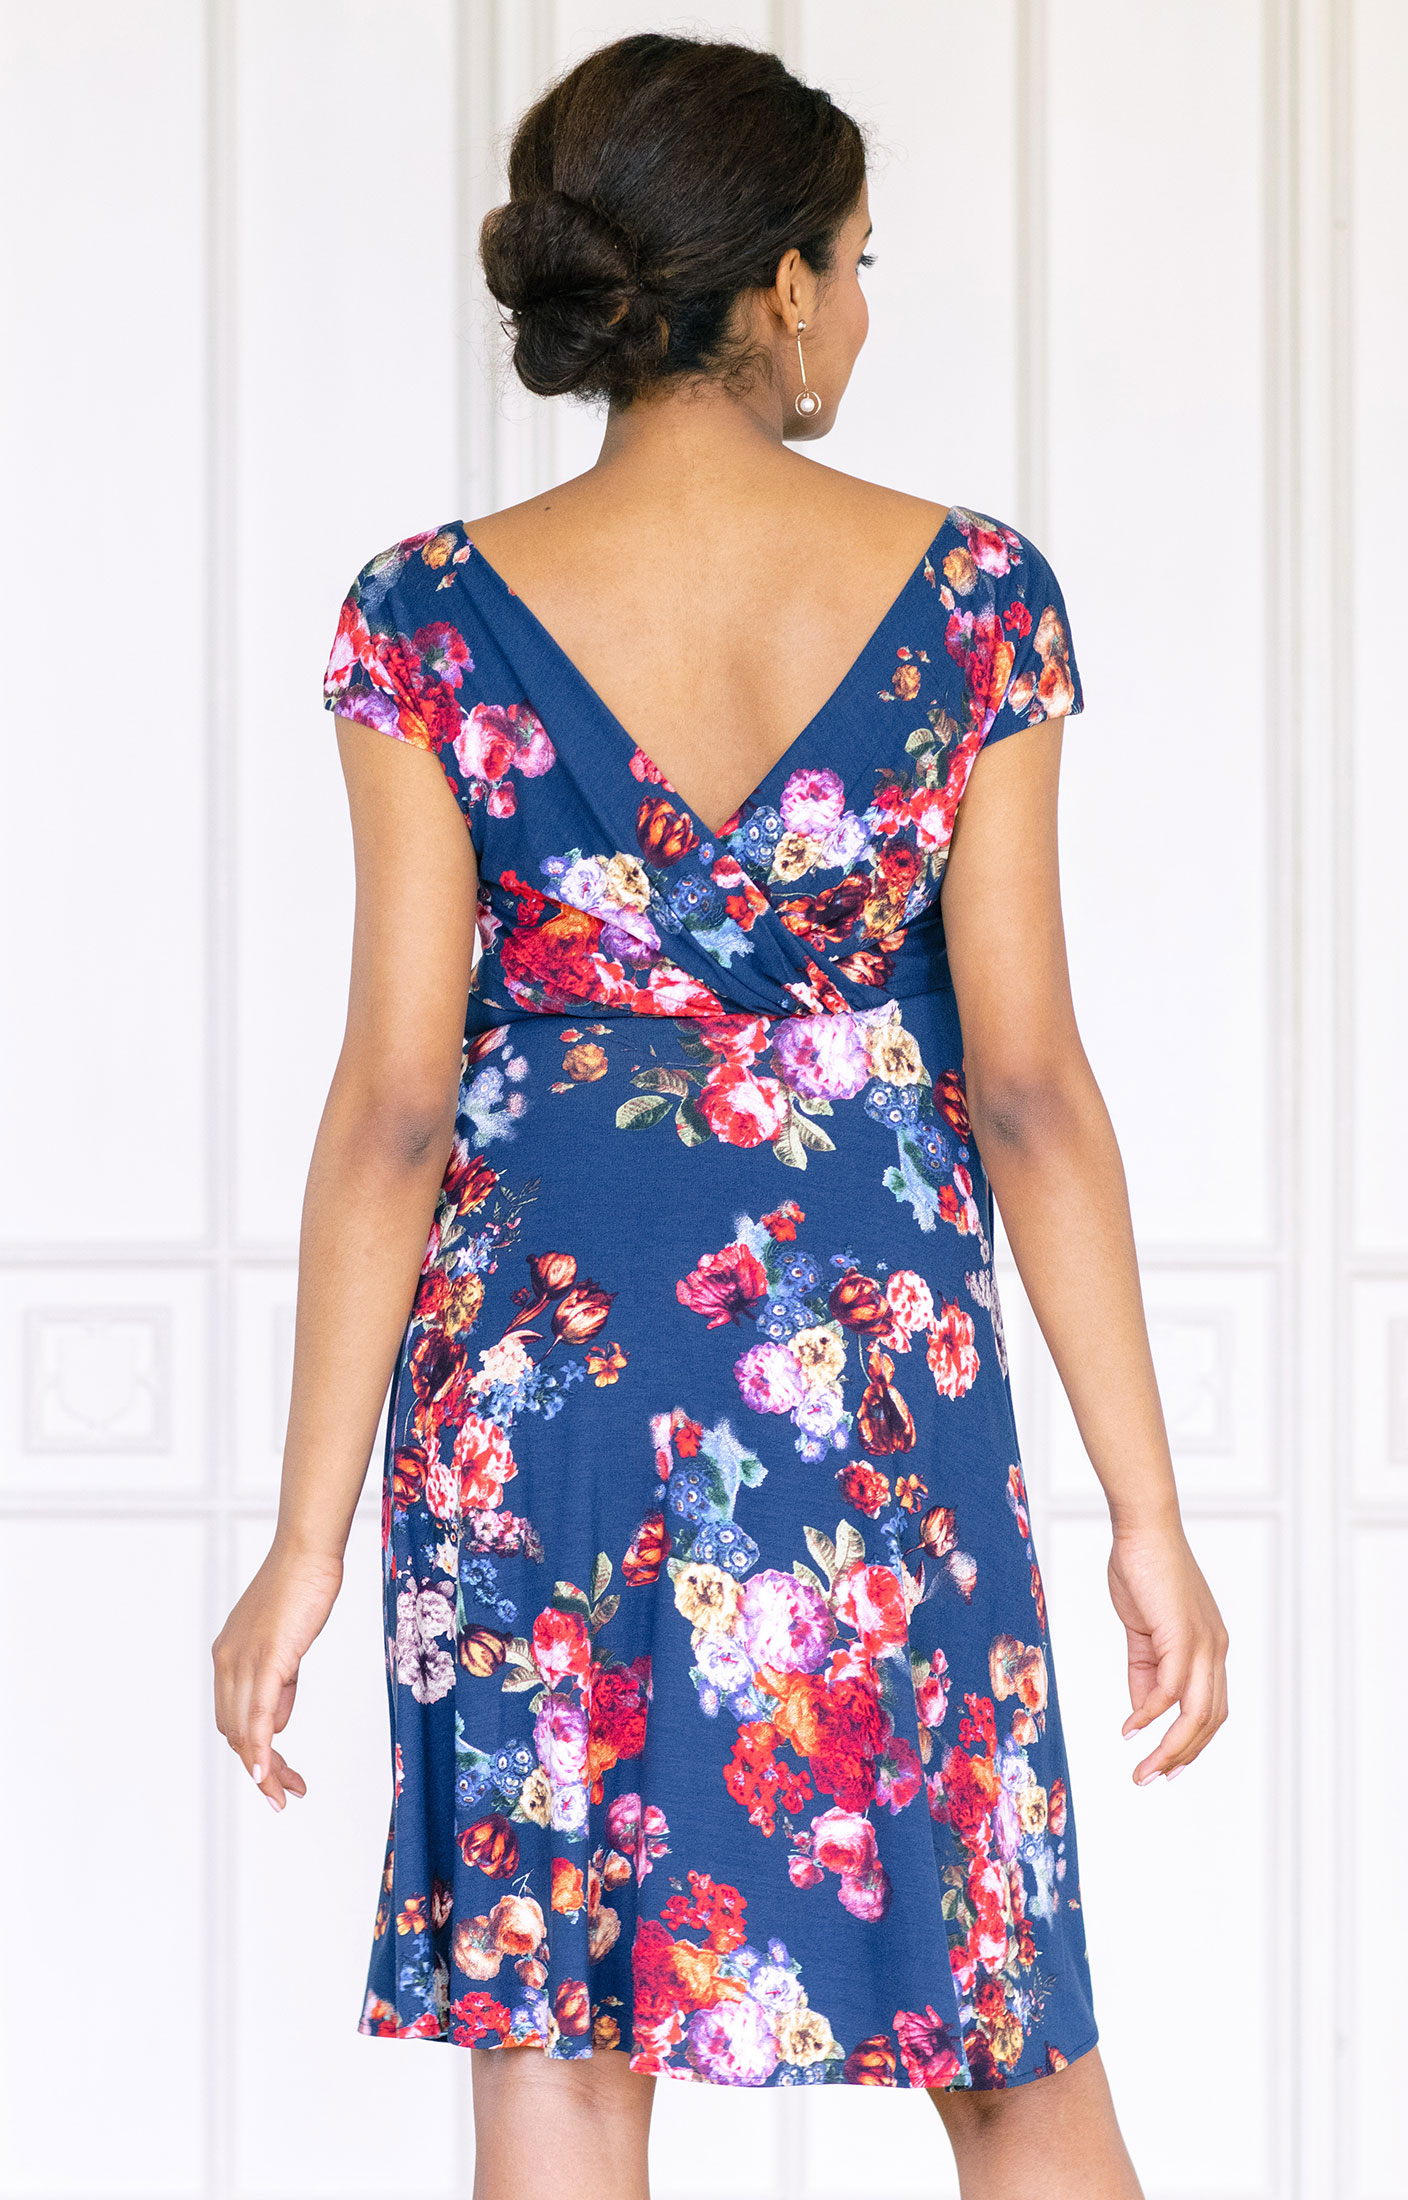 Made in USA My Bump Women's Floral Maternity Dress 